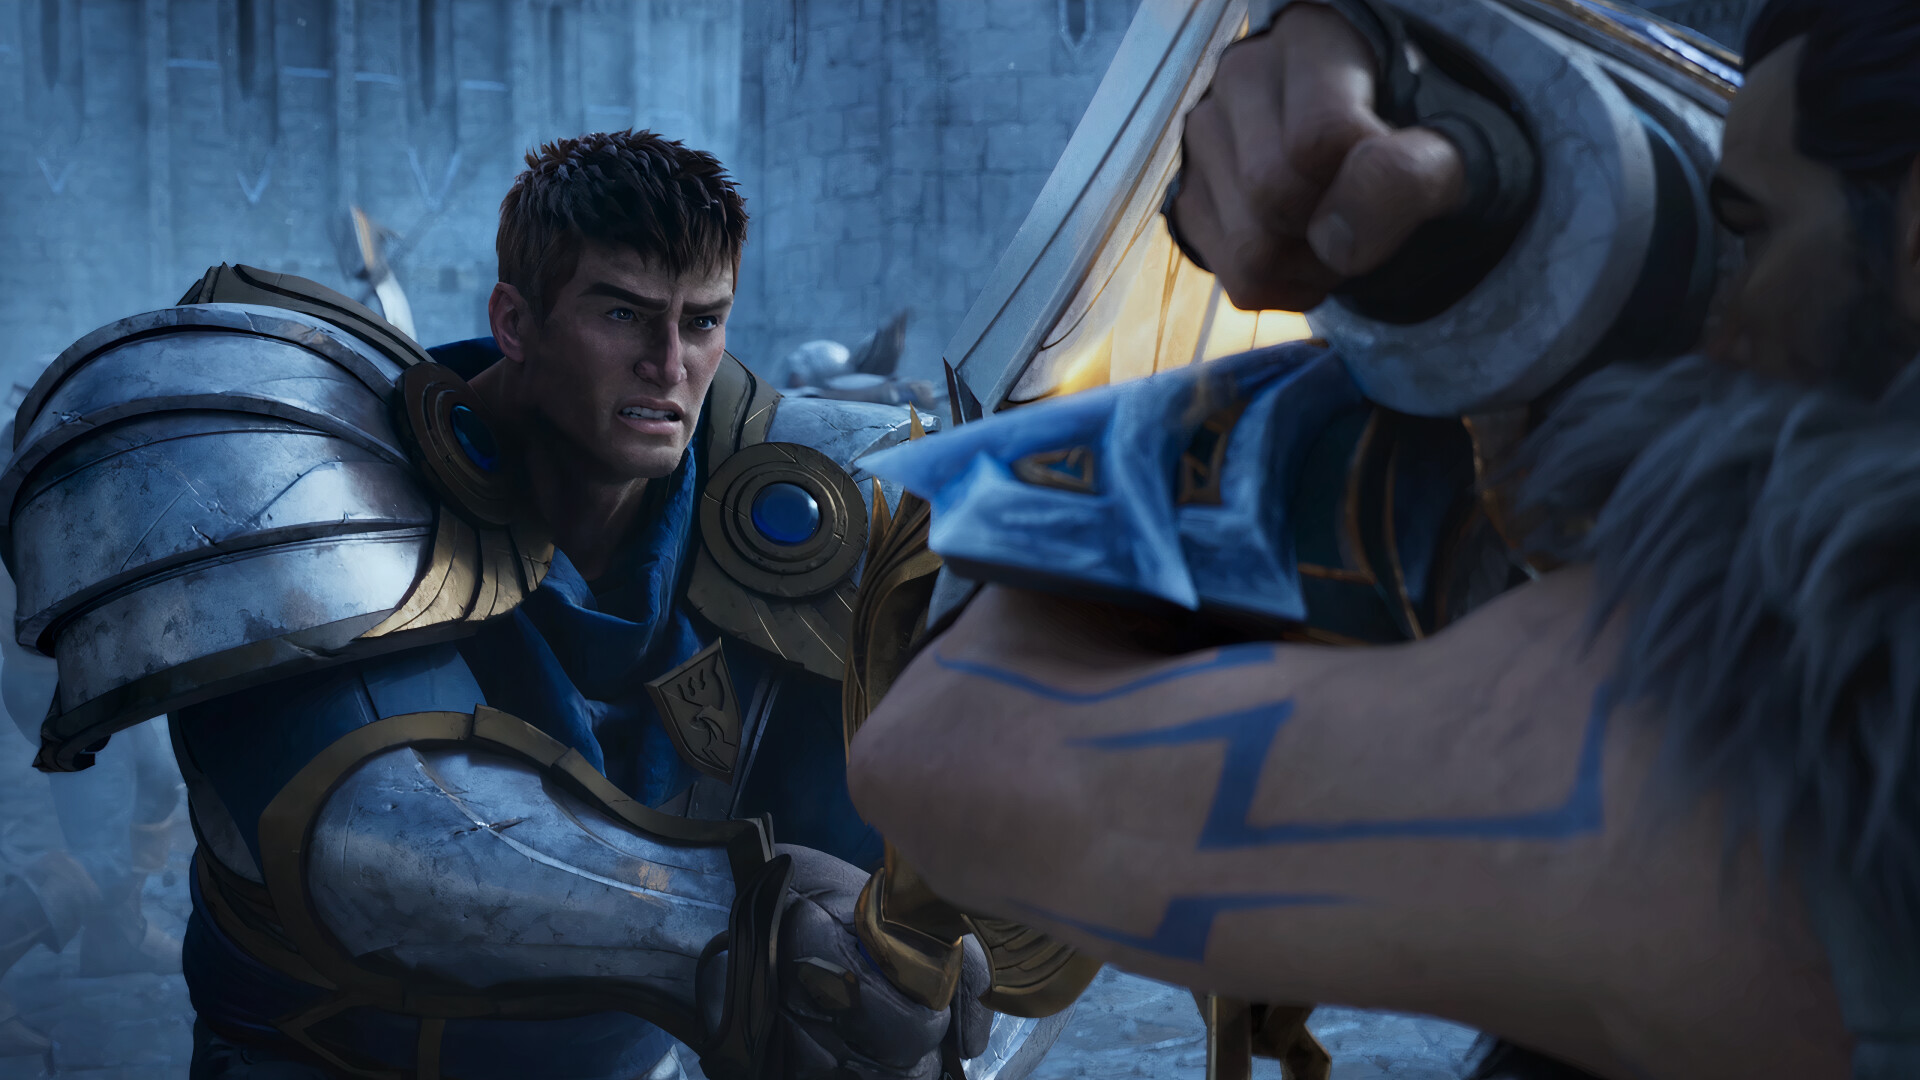 Garen: Sword-Captain of Demacia in a fight, MOBA inspired by Defense of the Ancients, a custom map for Warcraft III. 1920x1080 Full HD Wallpaper.